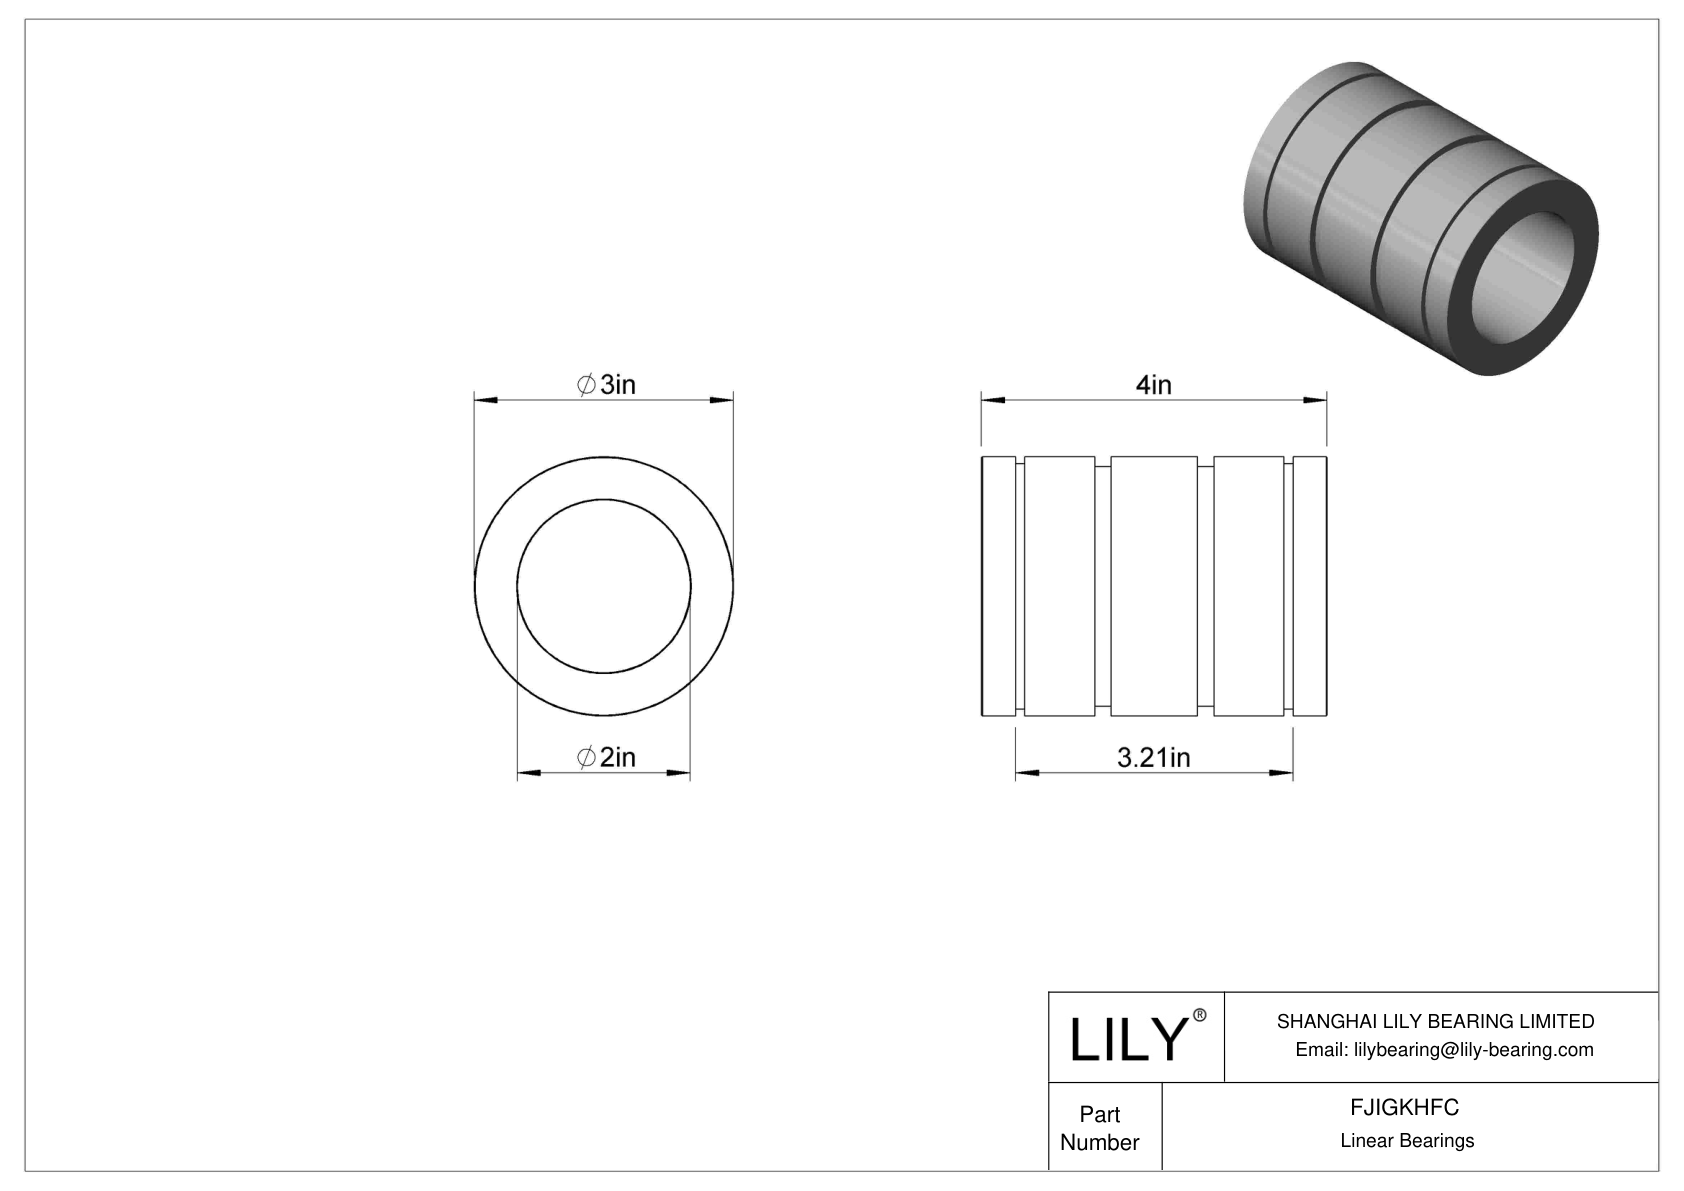 FJIGKHFC Common Linear Sleeve Bearings cad drawing